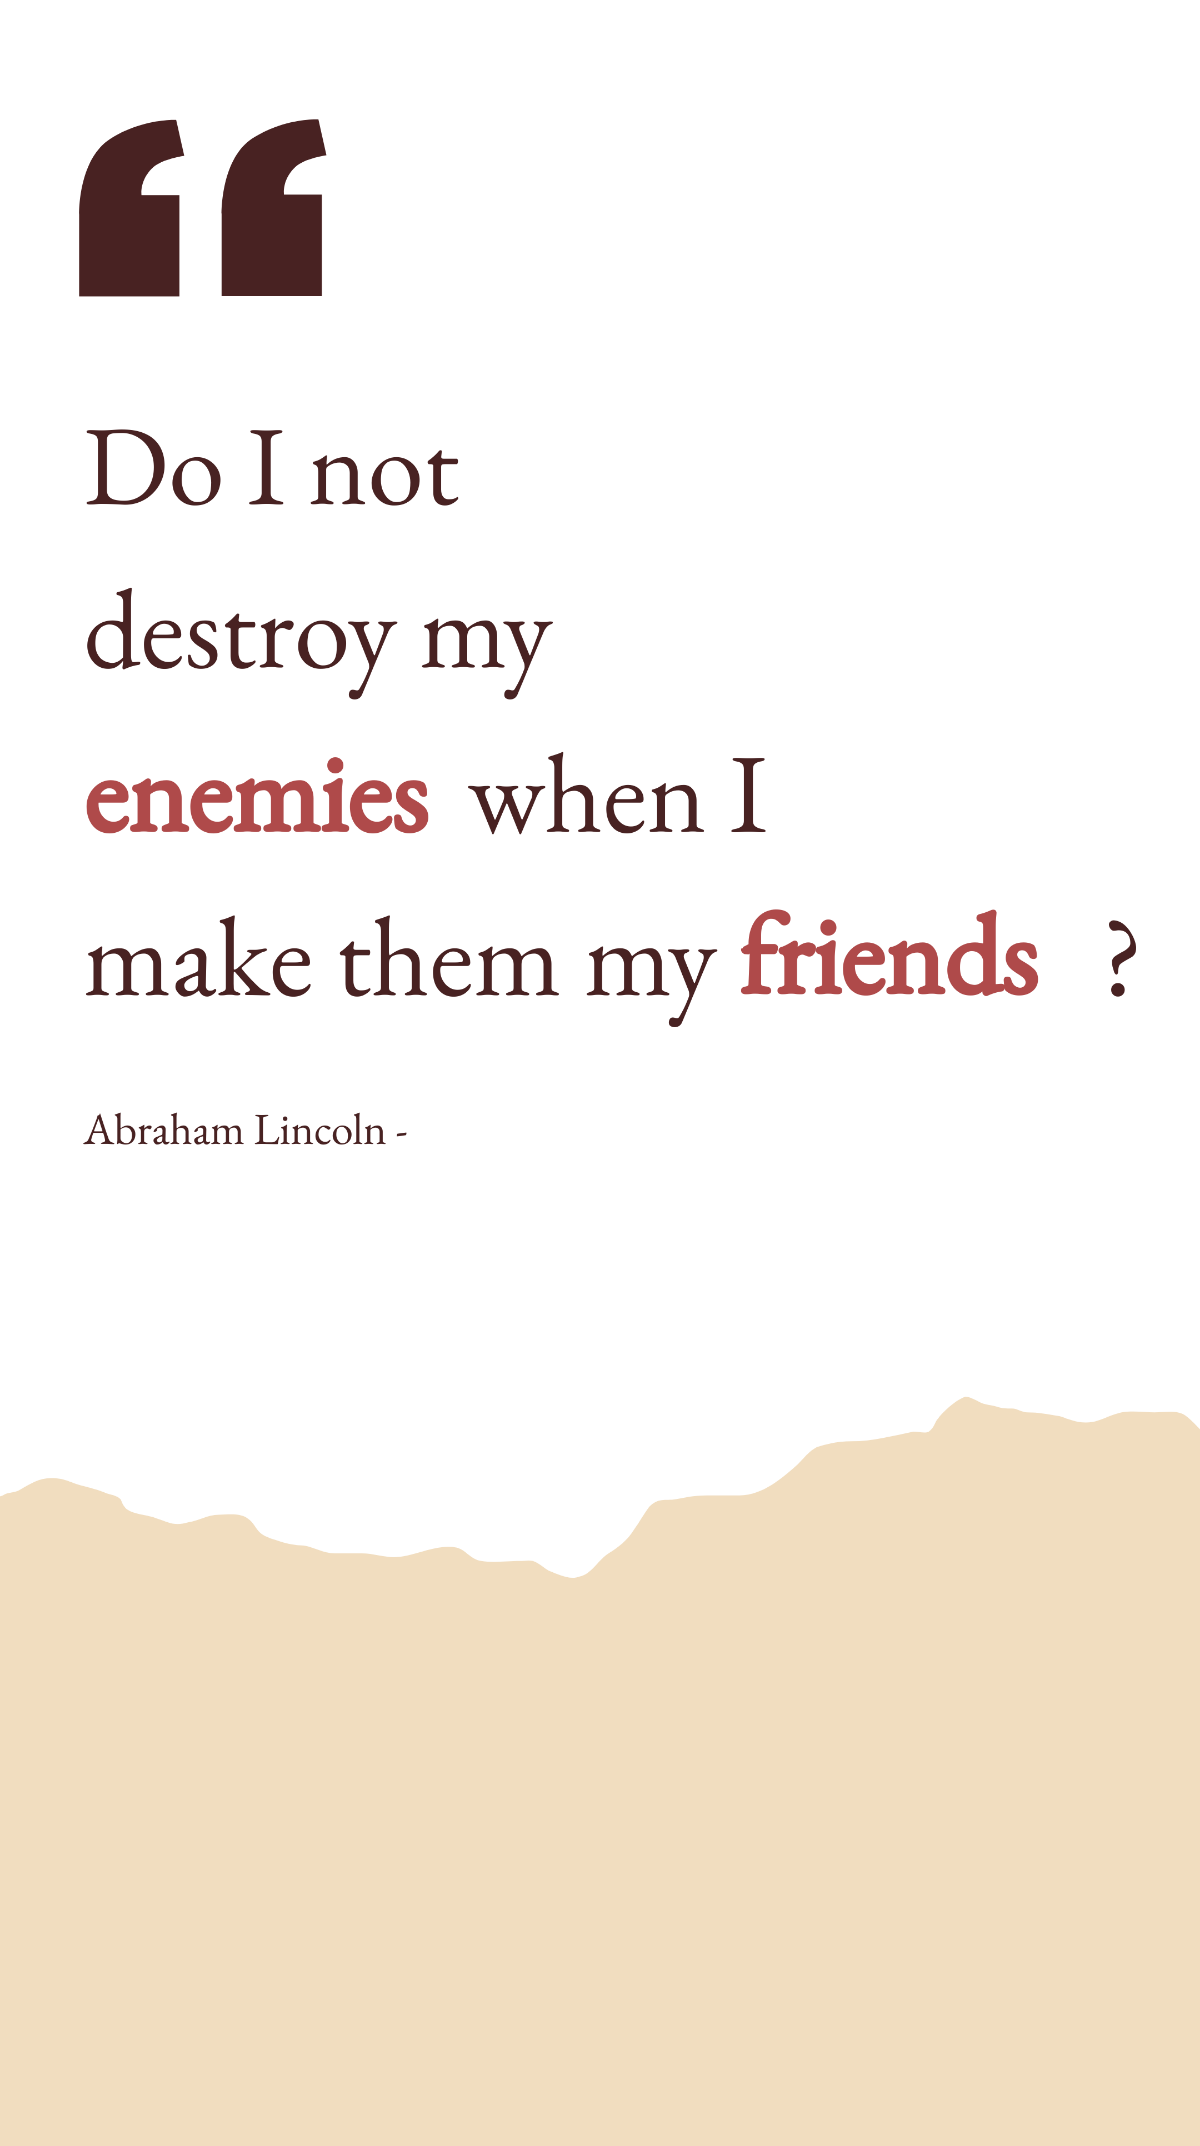 Abraham Lincoln - Do I not destroy my enemies when I make them my friends? Template